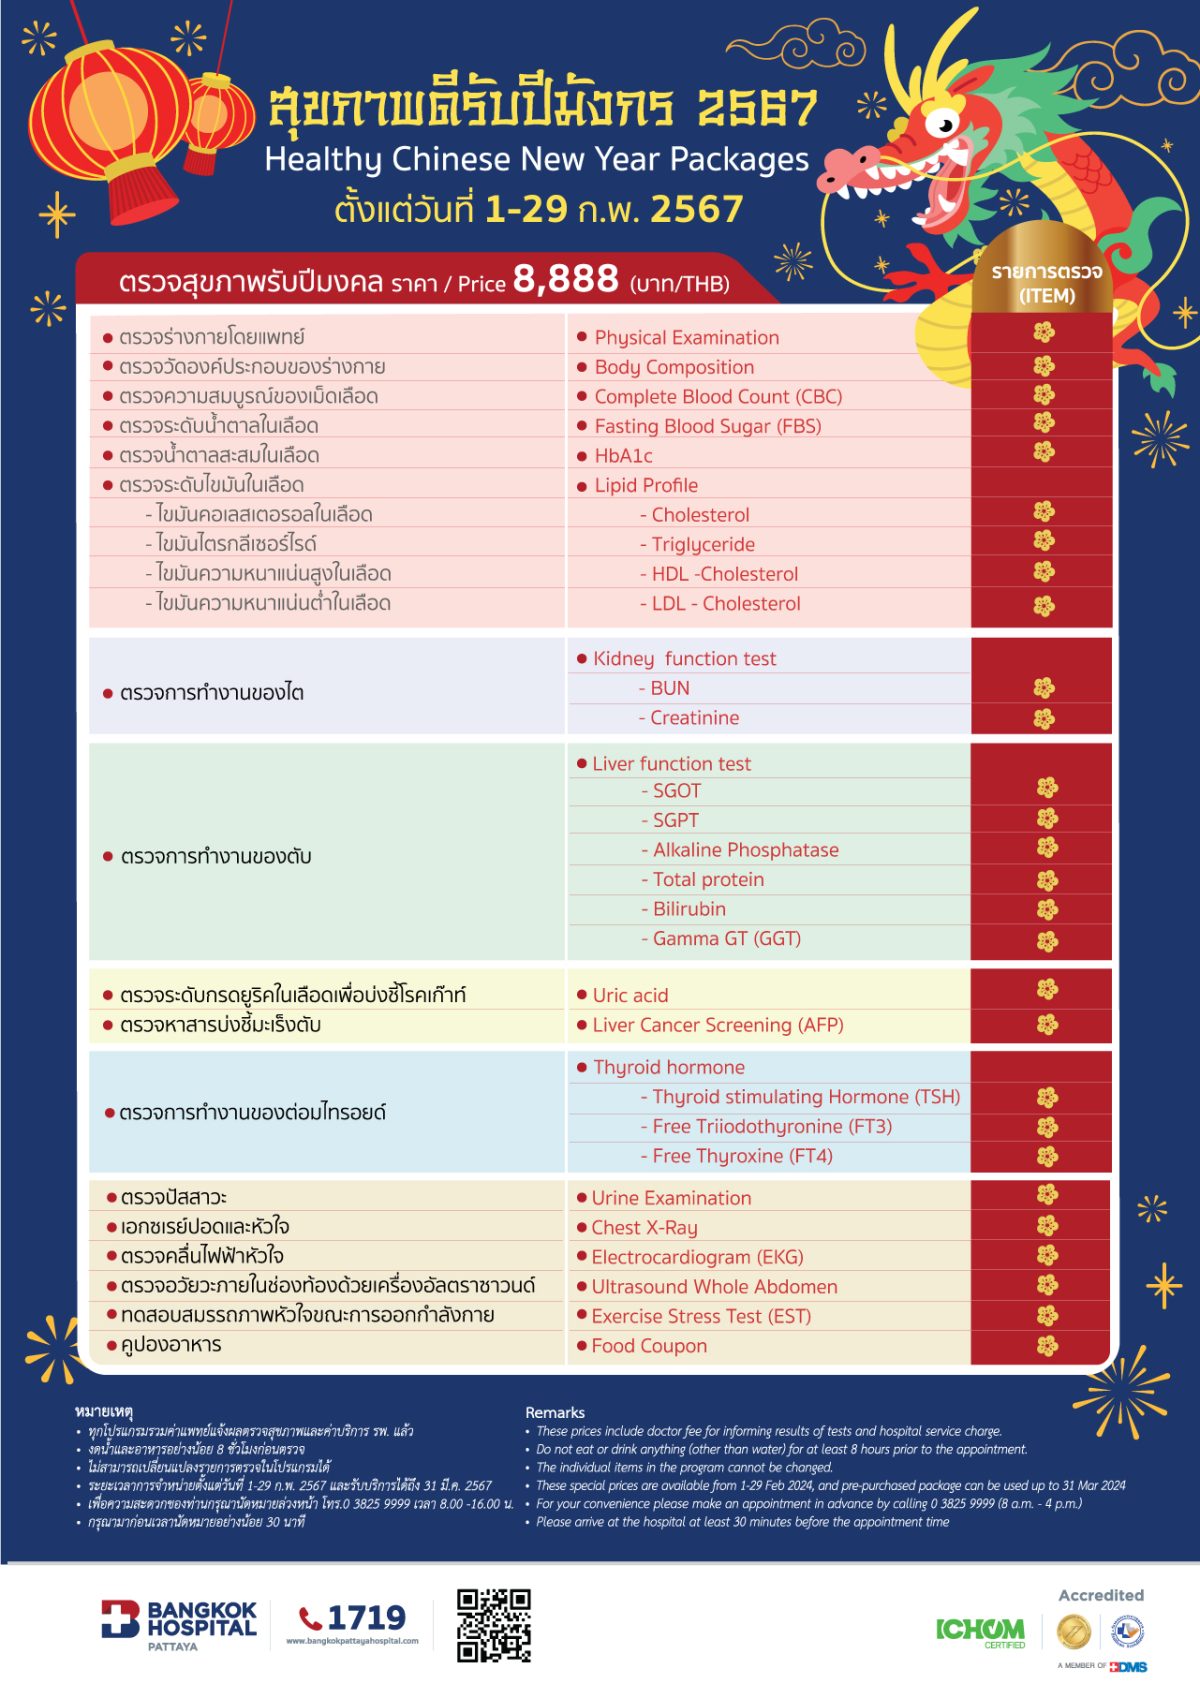 Healthy Chinese New Year Packages